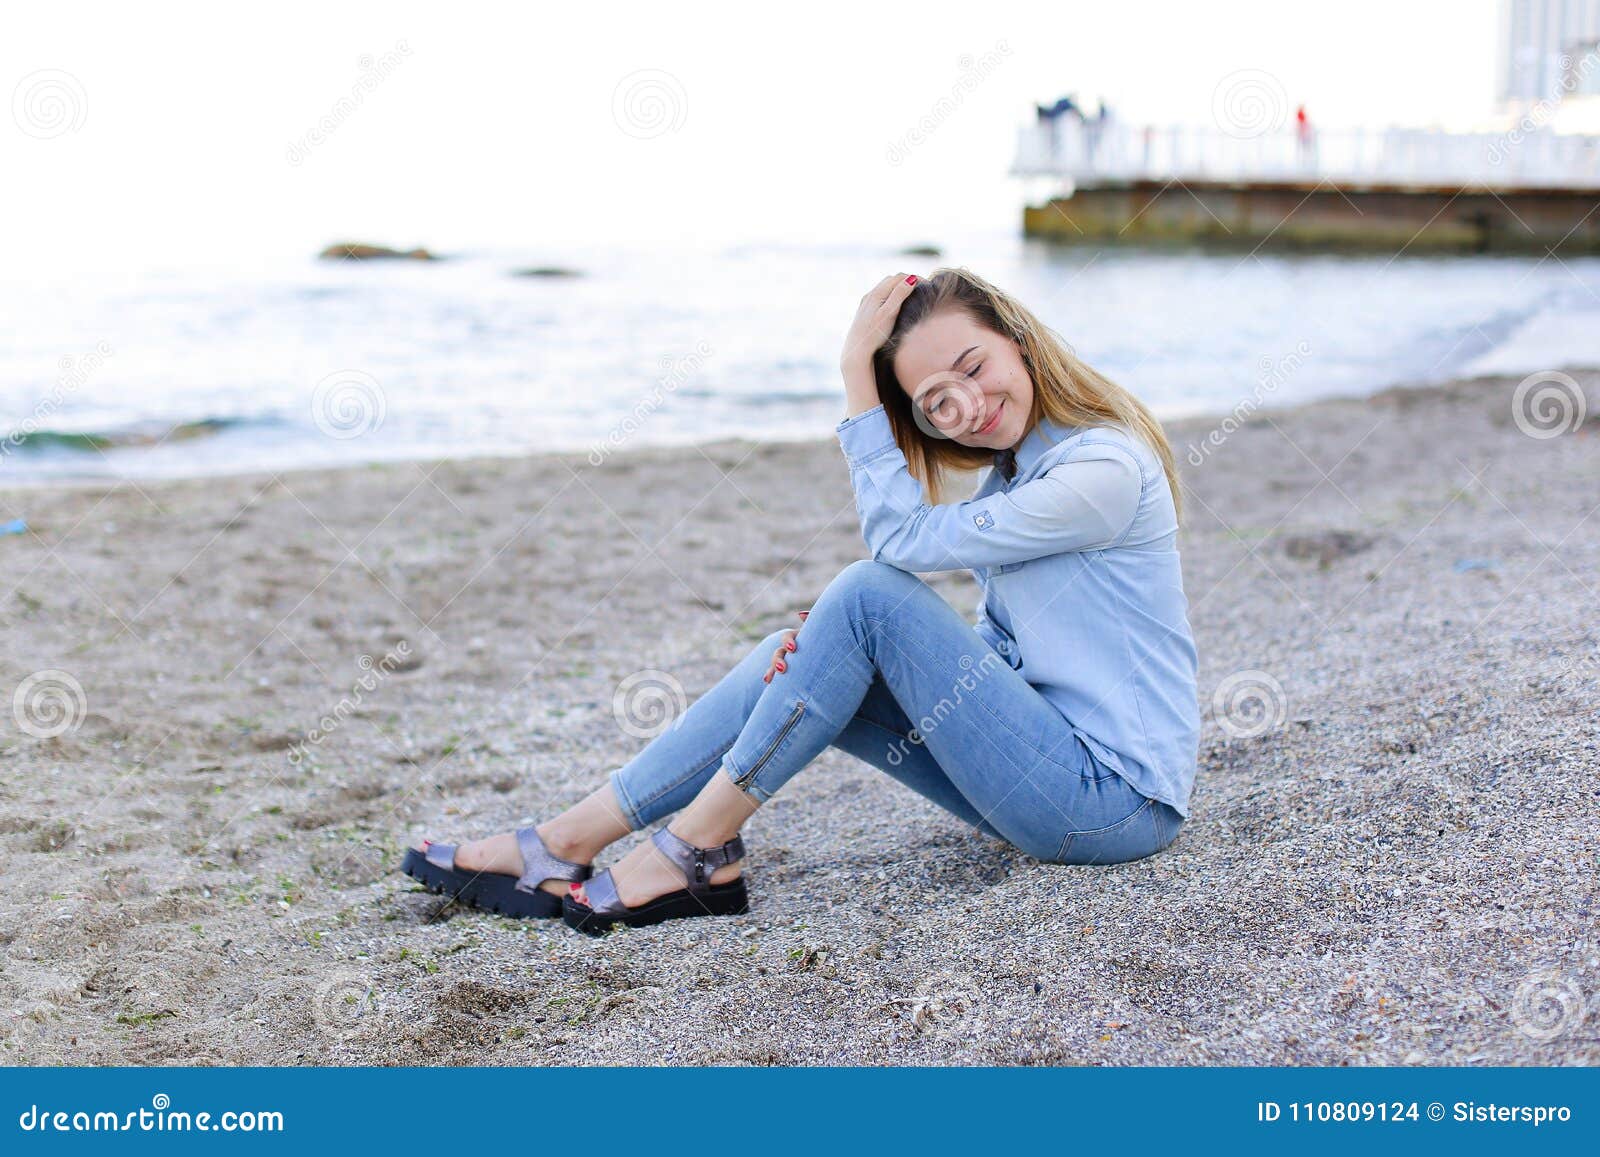 Smiling Young Woman Rests On Beach And Poses In Camera Sitting